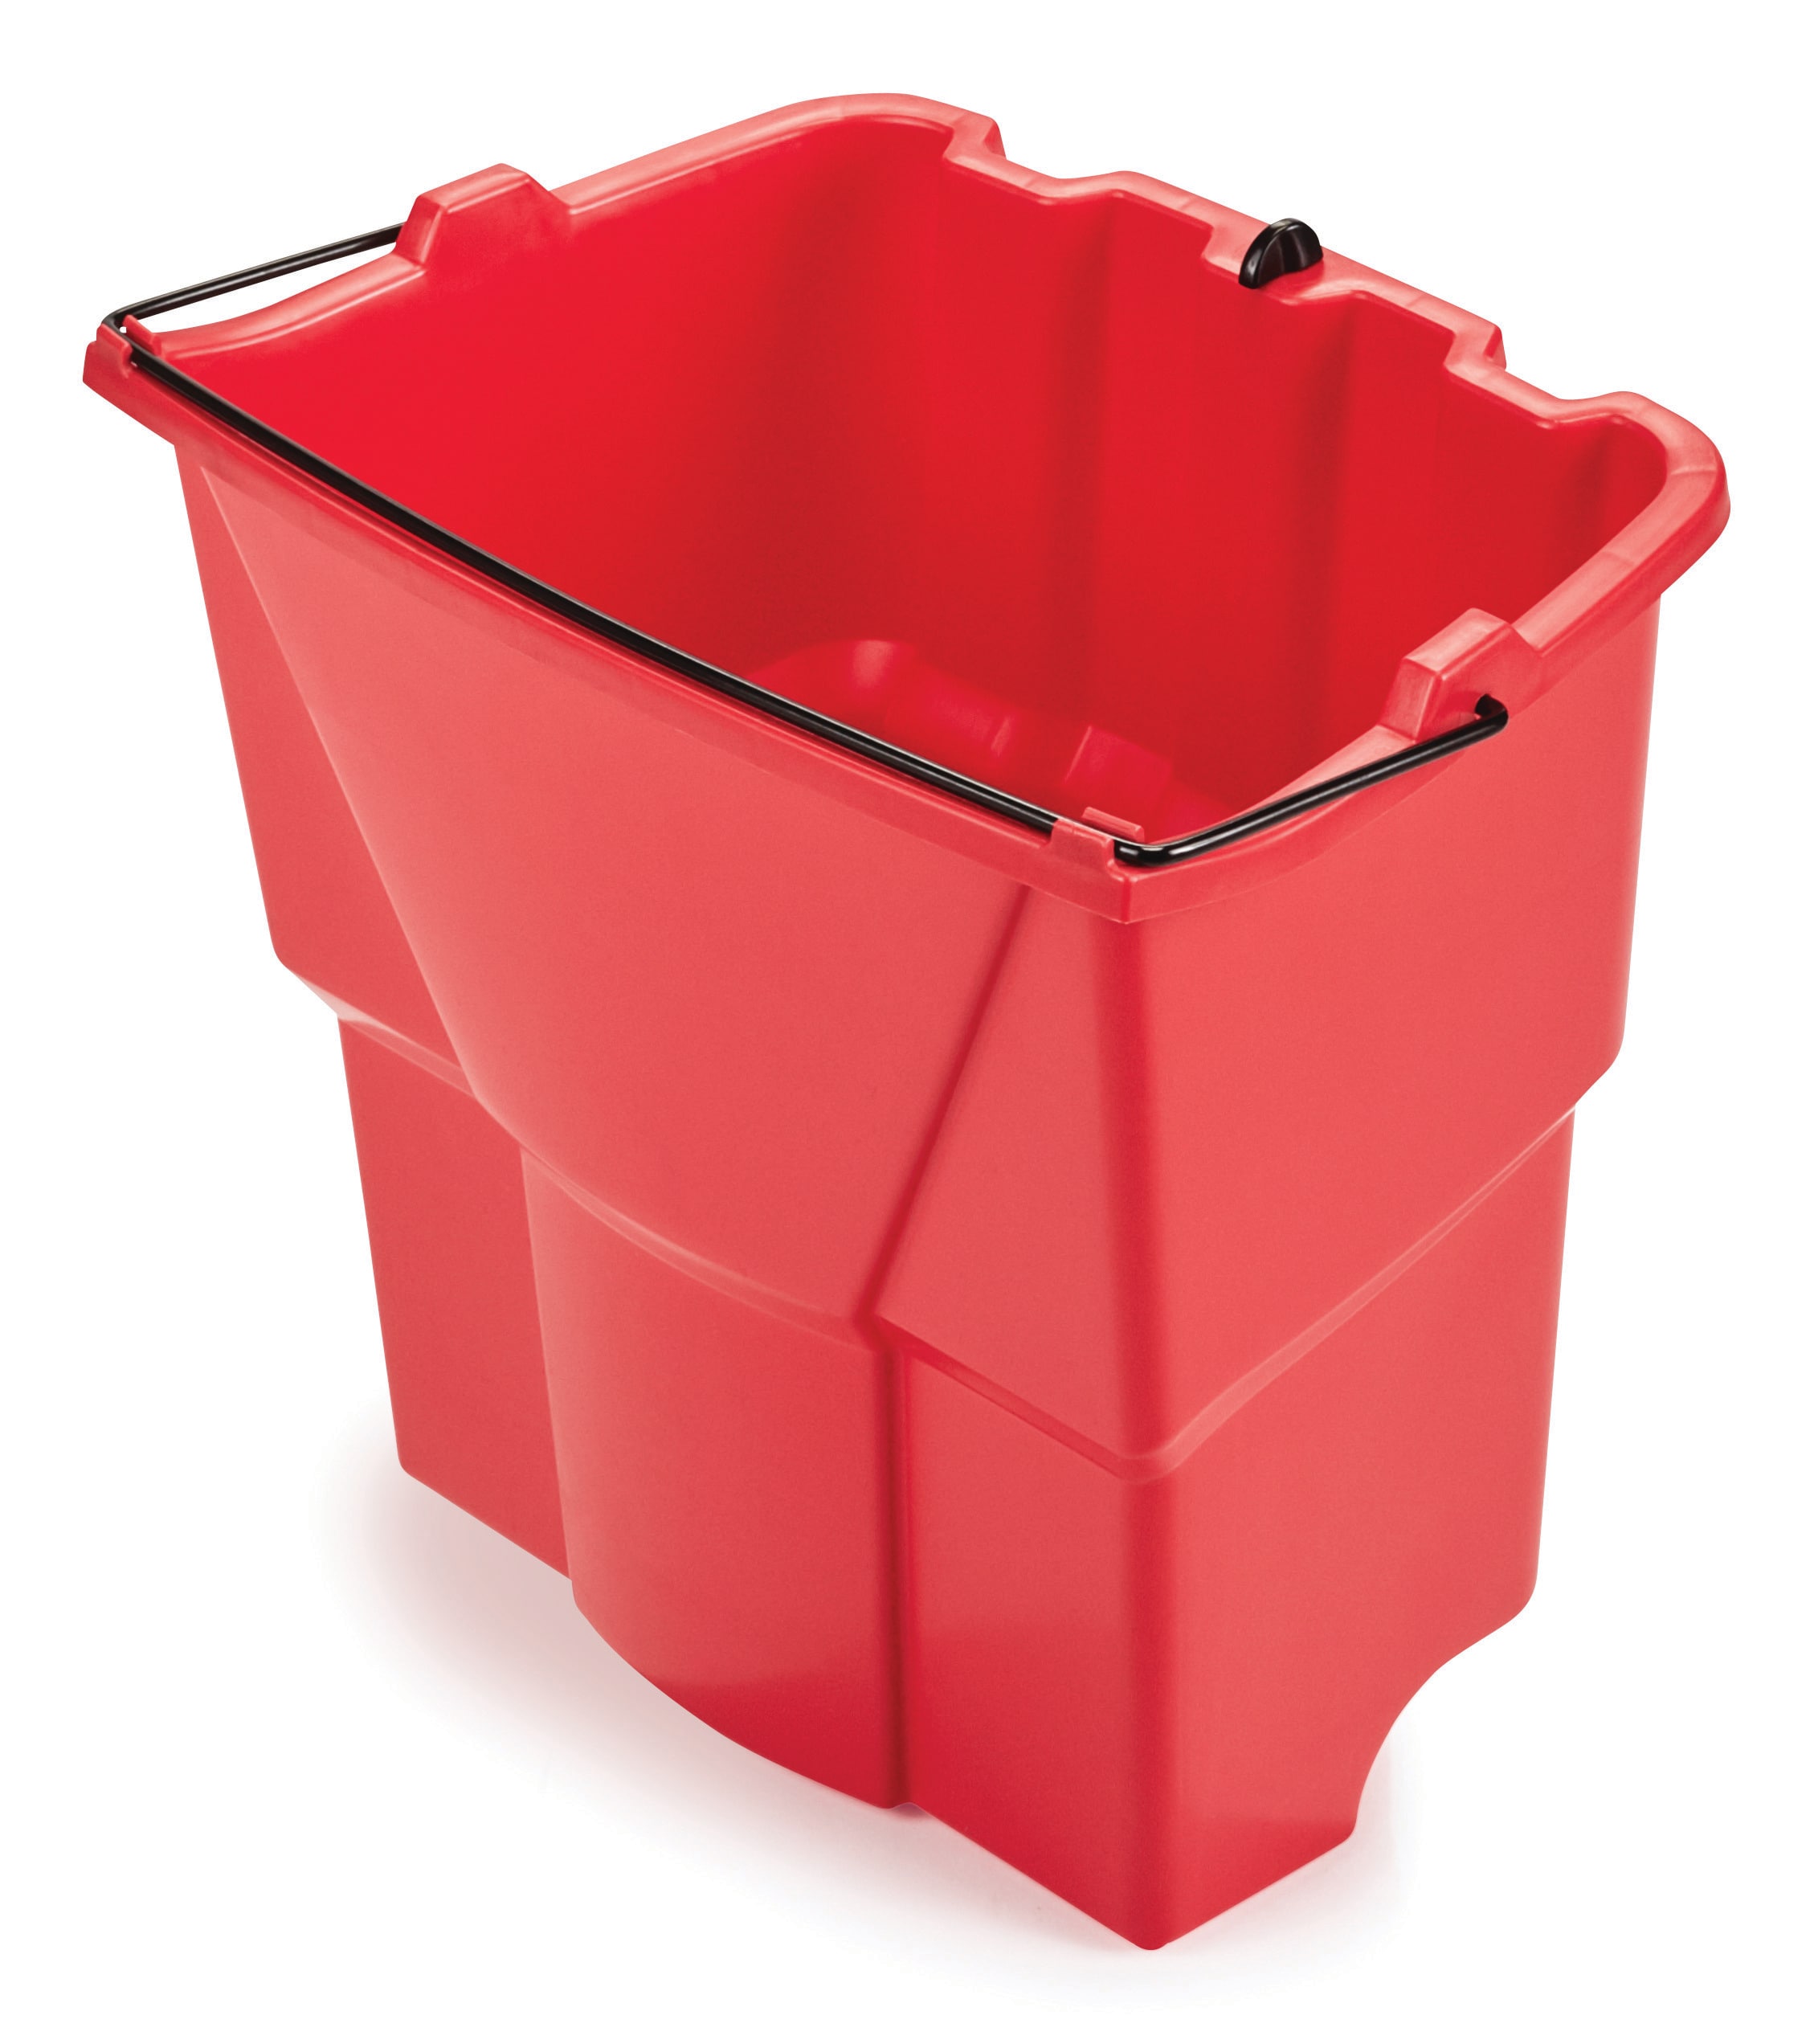 Rubbermaid Commercial Dual Water Mop Bucket 7570 and Press Wringer Co 6127